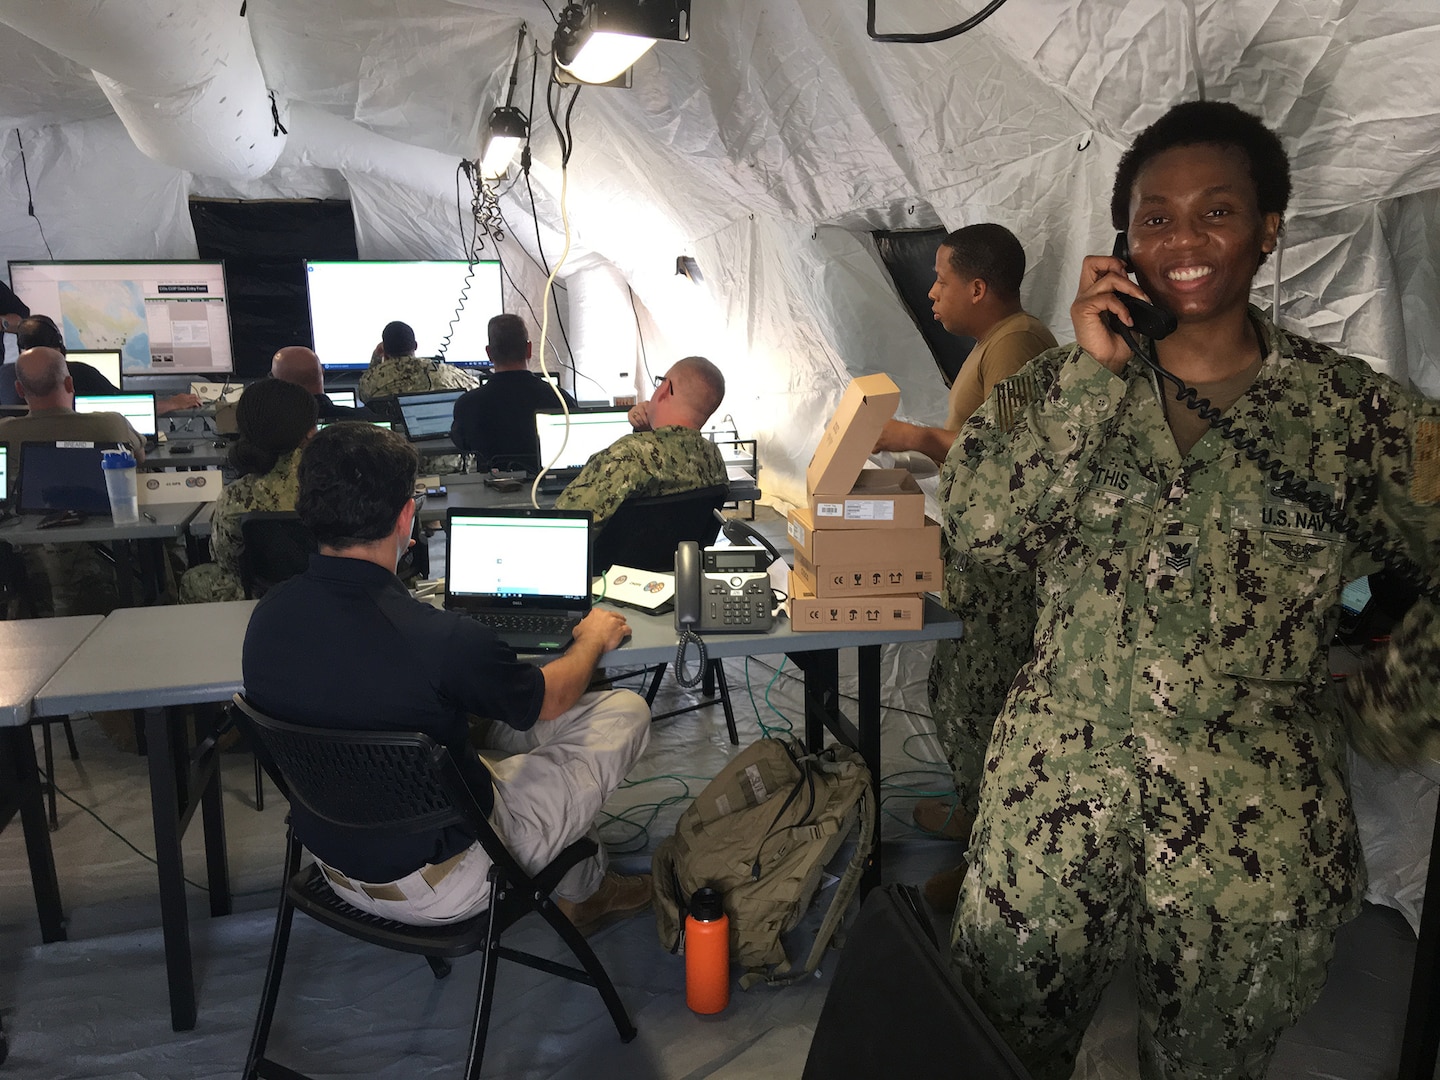 Petty Officer 1st Class Angelica Mathis, JTF-CS communications specialist, conducts a radio check with the PRC-150 during a recent exercise. (Photo by Navy Mass Communication Specialist 3rd Class Michael Redd)